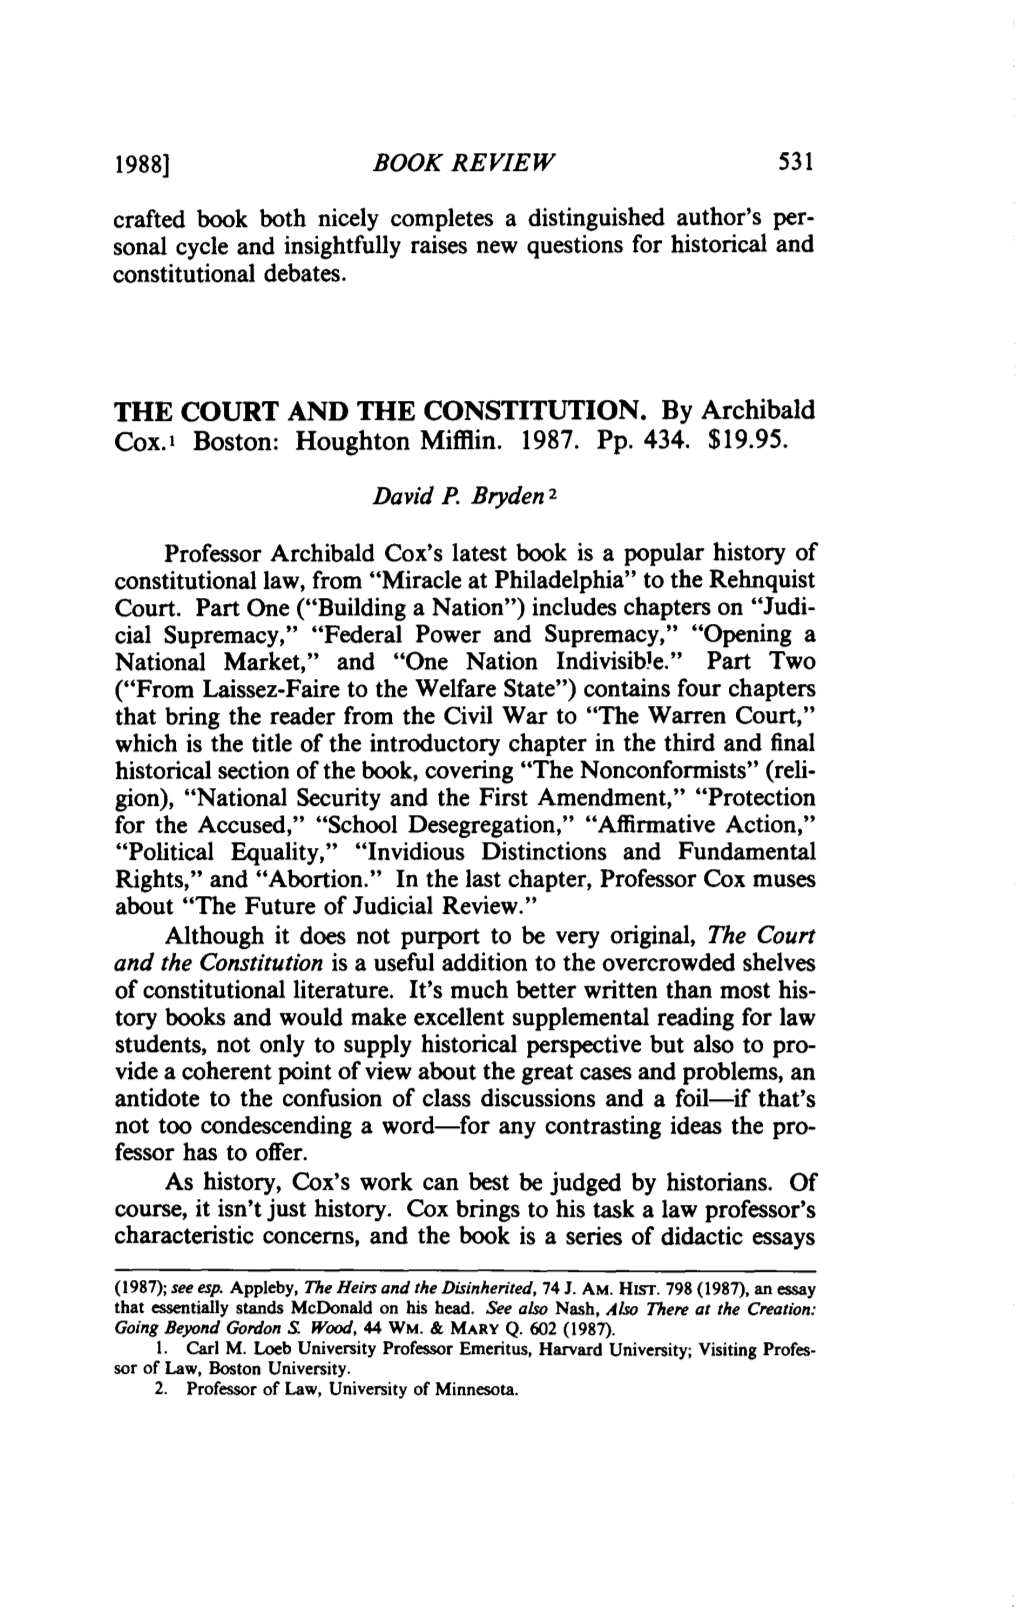 THE COURT and the CONSTITUTION. by Archibald Cox.' Boston: Houghton Mifflin